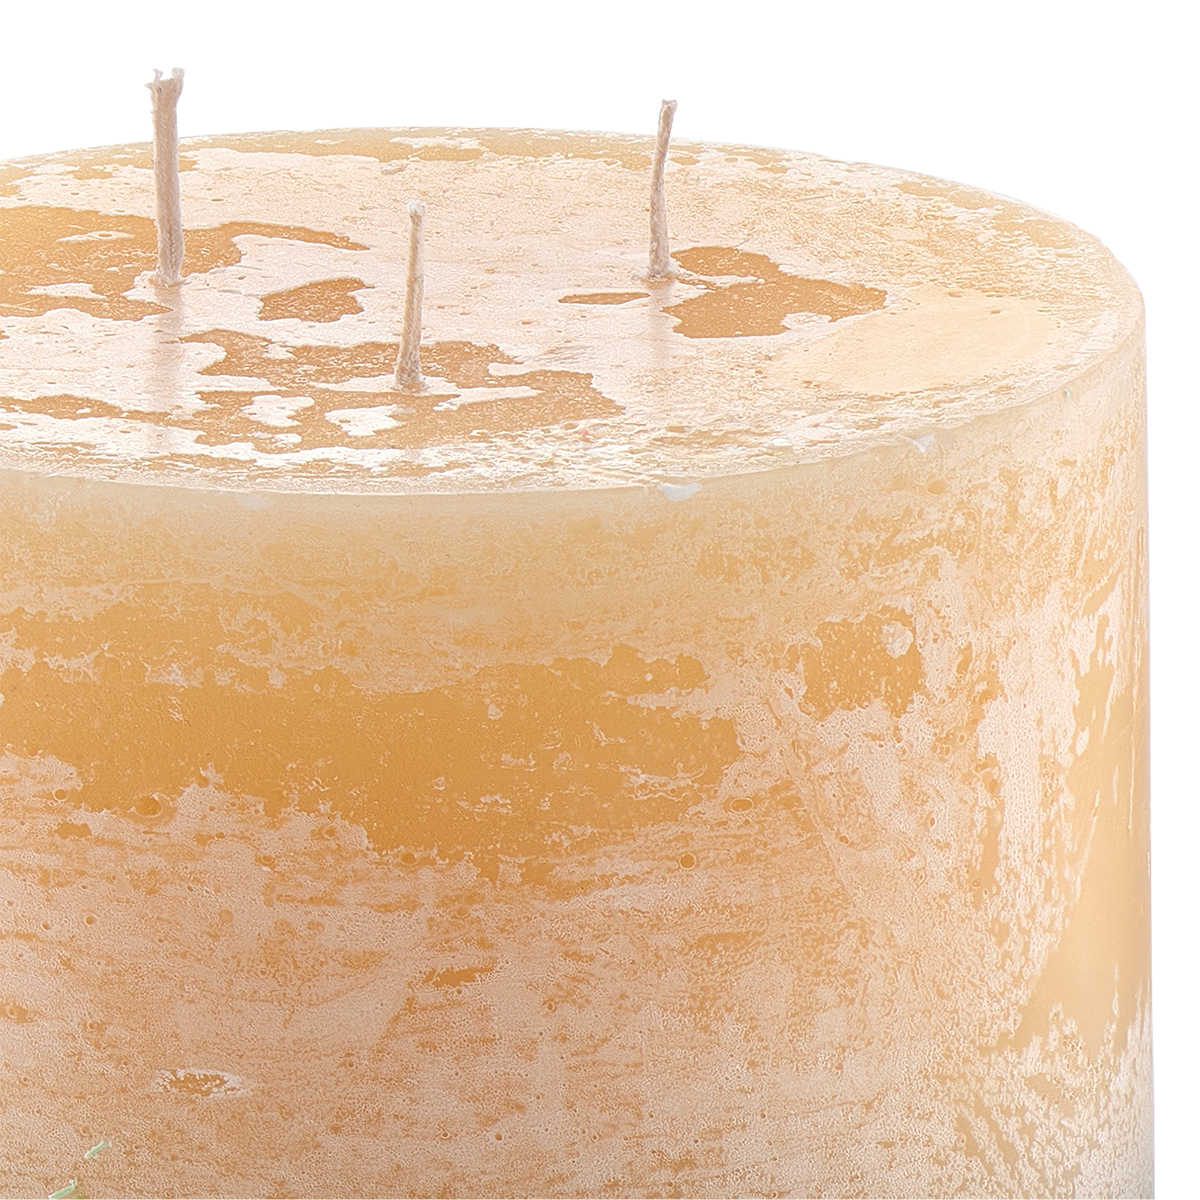 0020_crop_0000_3_wick_candle_winter_spice_093_png_png.png